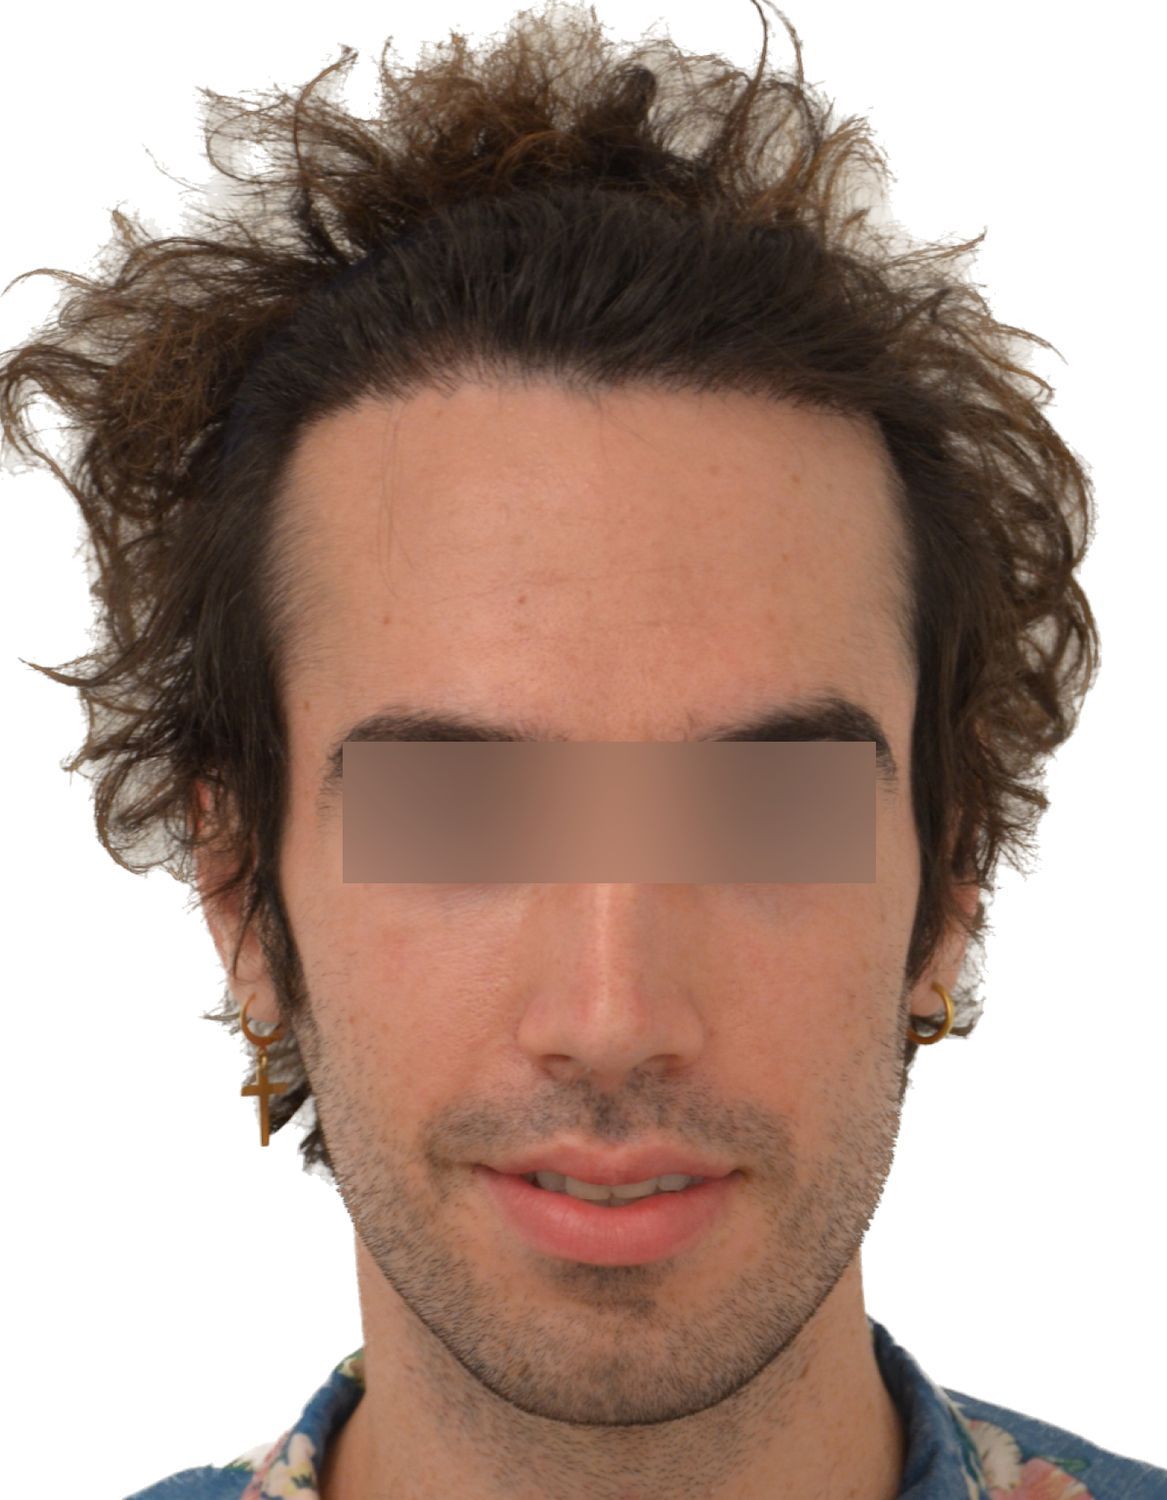 Forehead Reduction Surgery Before